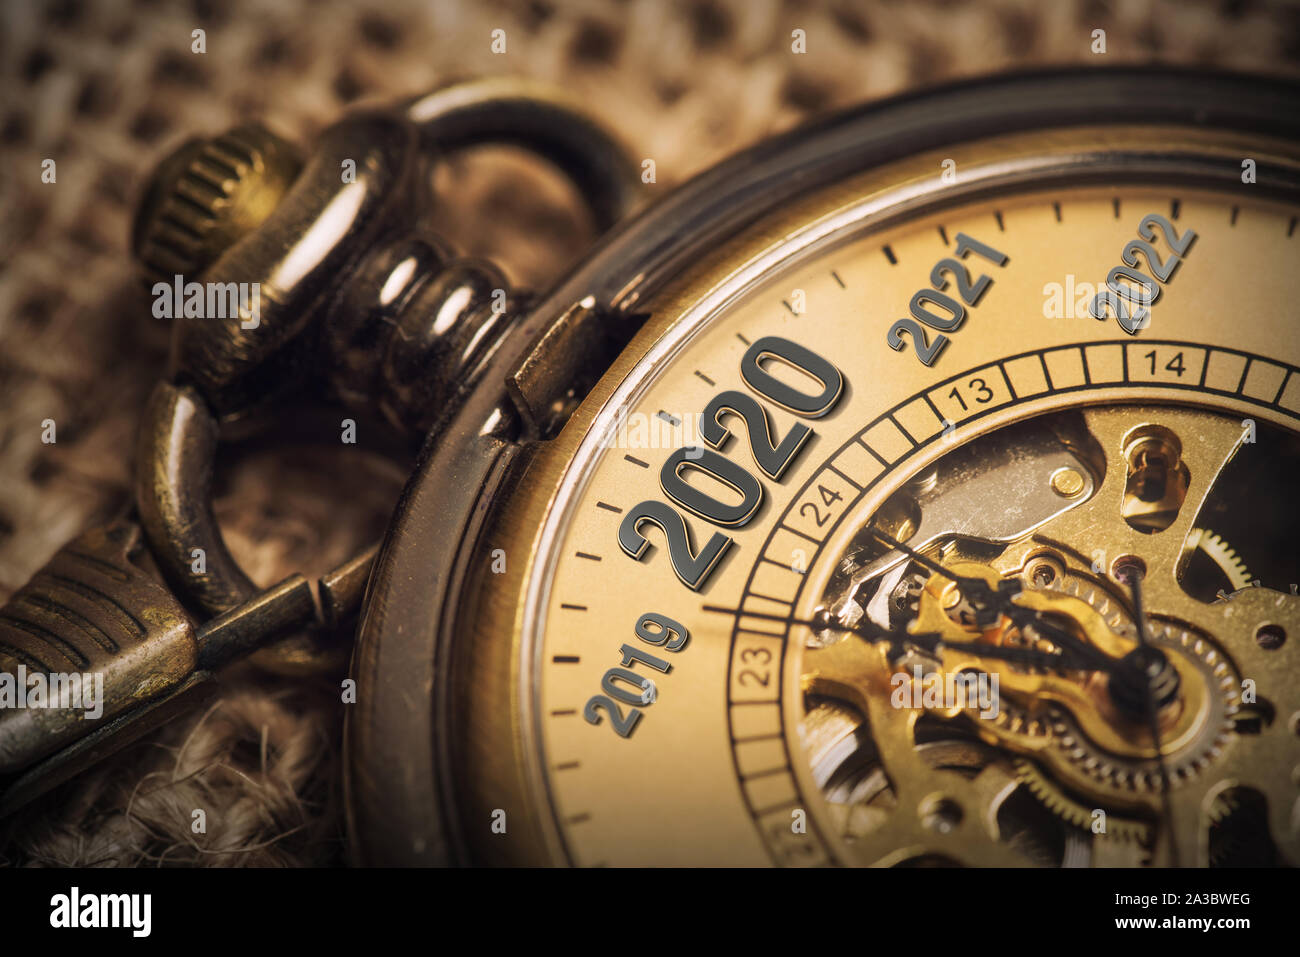 Expecting the new year 2020 with a metaphor of ticking pocket watch. Stock Photo